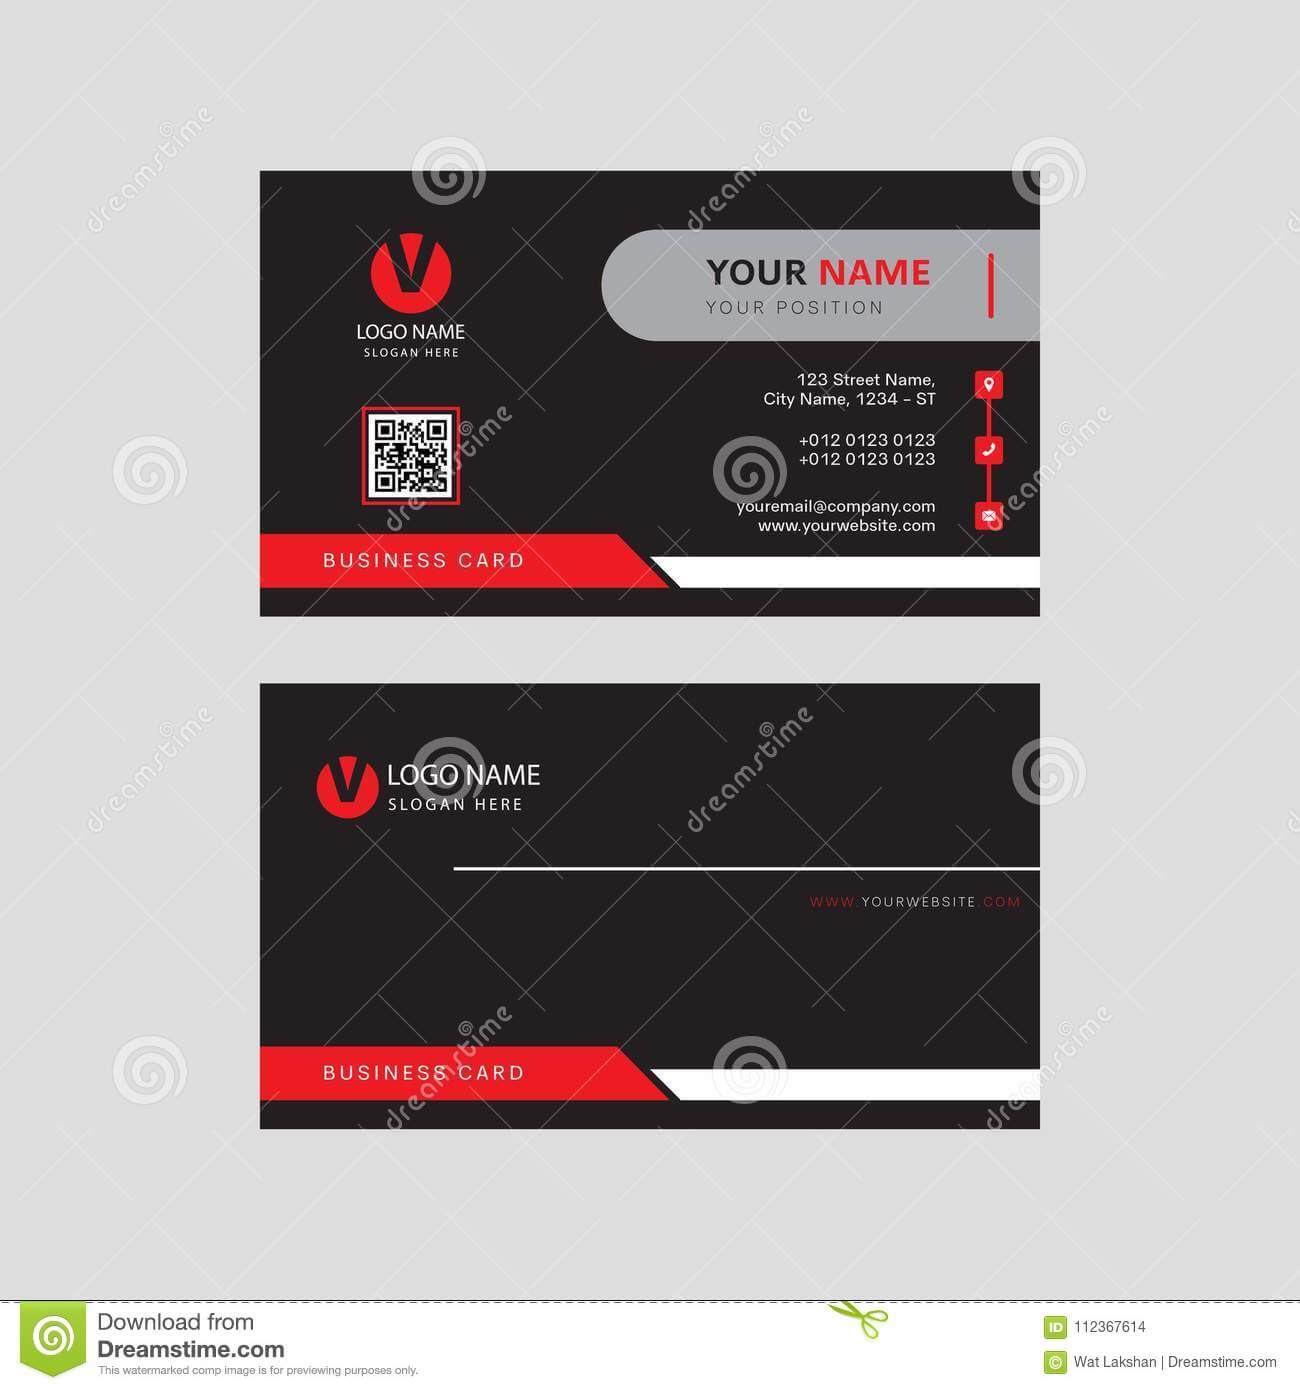 Modern Professional Eye Catching Business Card Design Intended For Visiting Card Templates Download